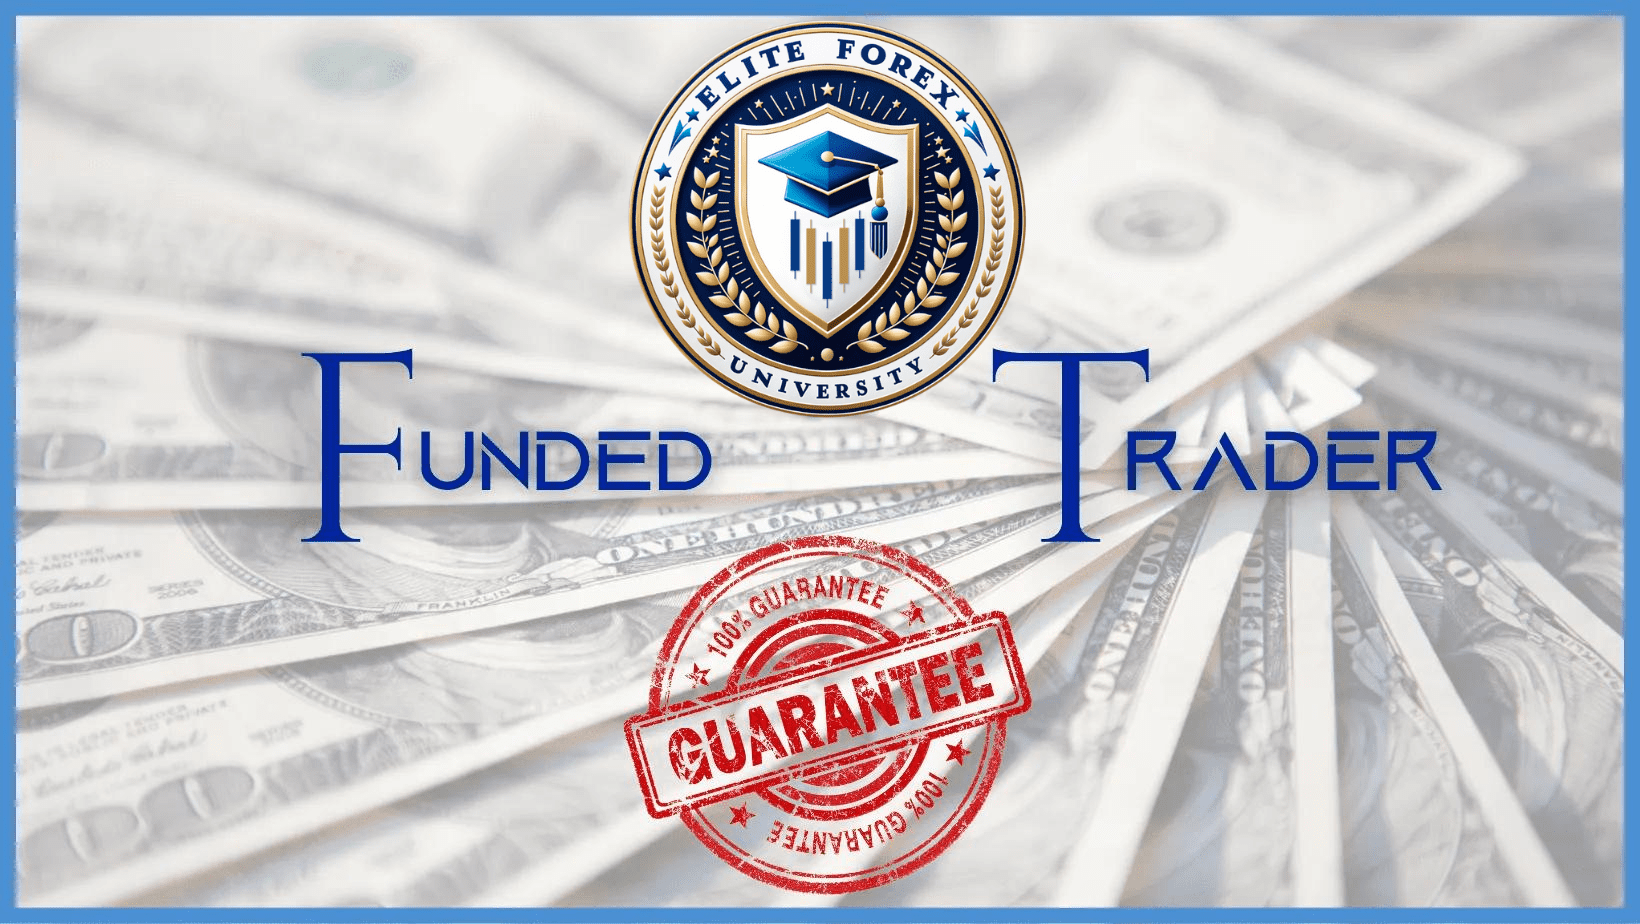 Funded Trader Thumbnail (1640 x 924 px)